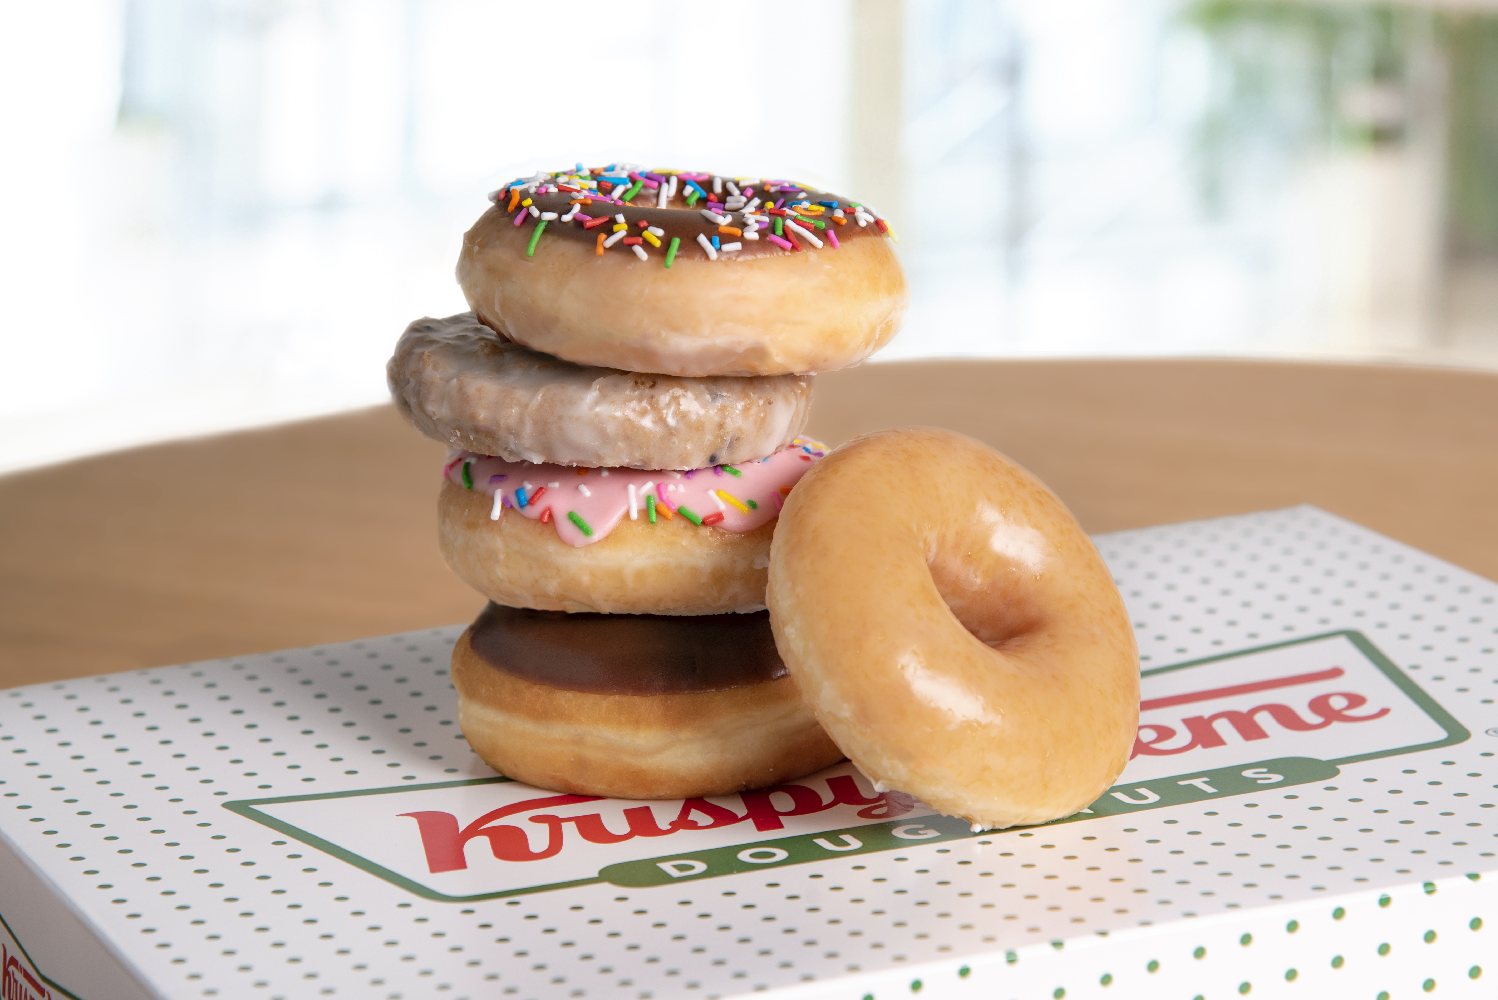 You can get half price doughnuts to eat in or take out at Krispy Kreme this month, The Manc